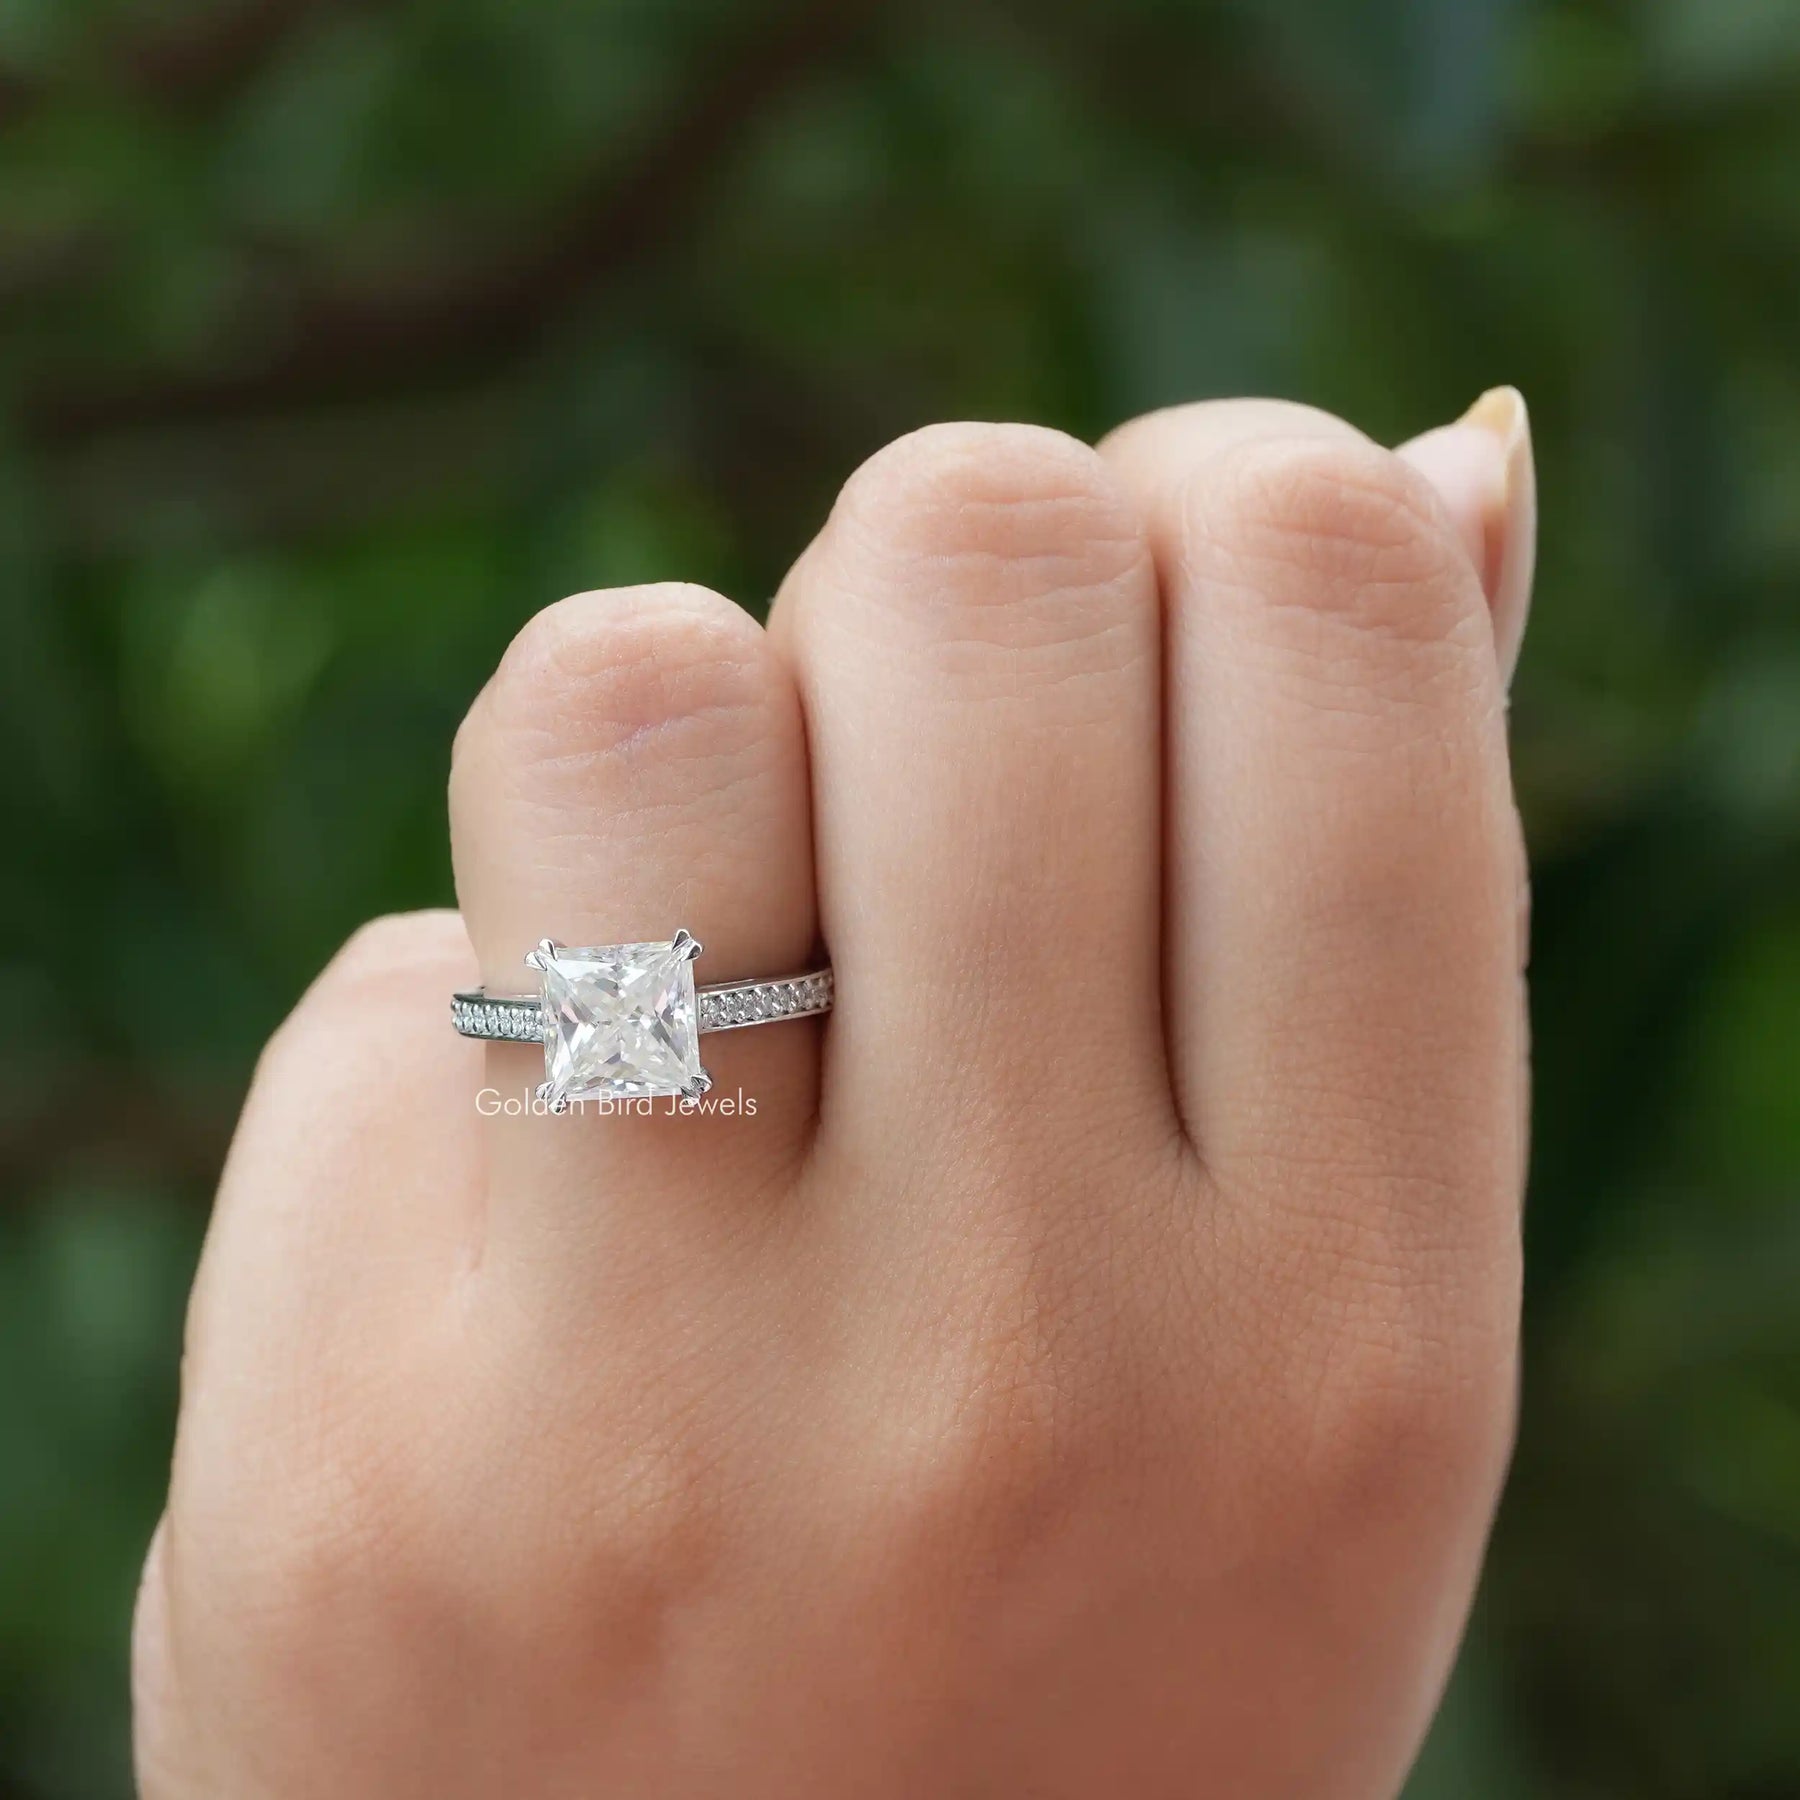 [In finger front view of moissanite engagement ring made of princess cut stone]-[Golden Bird  Jewels]